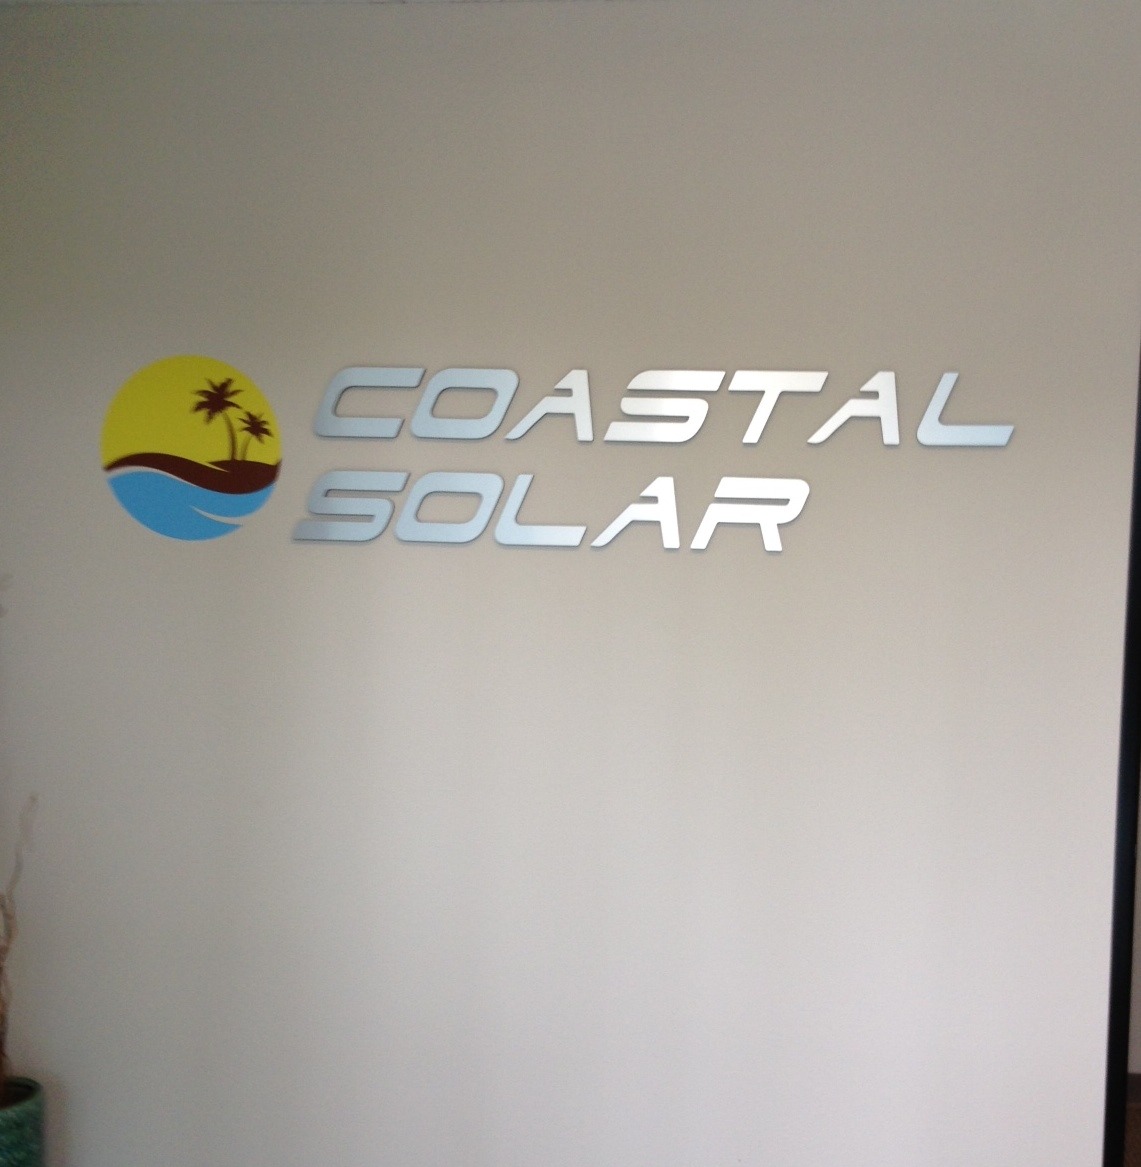 Brushed Aluminum lobby sign with a great logo